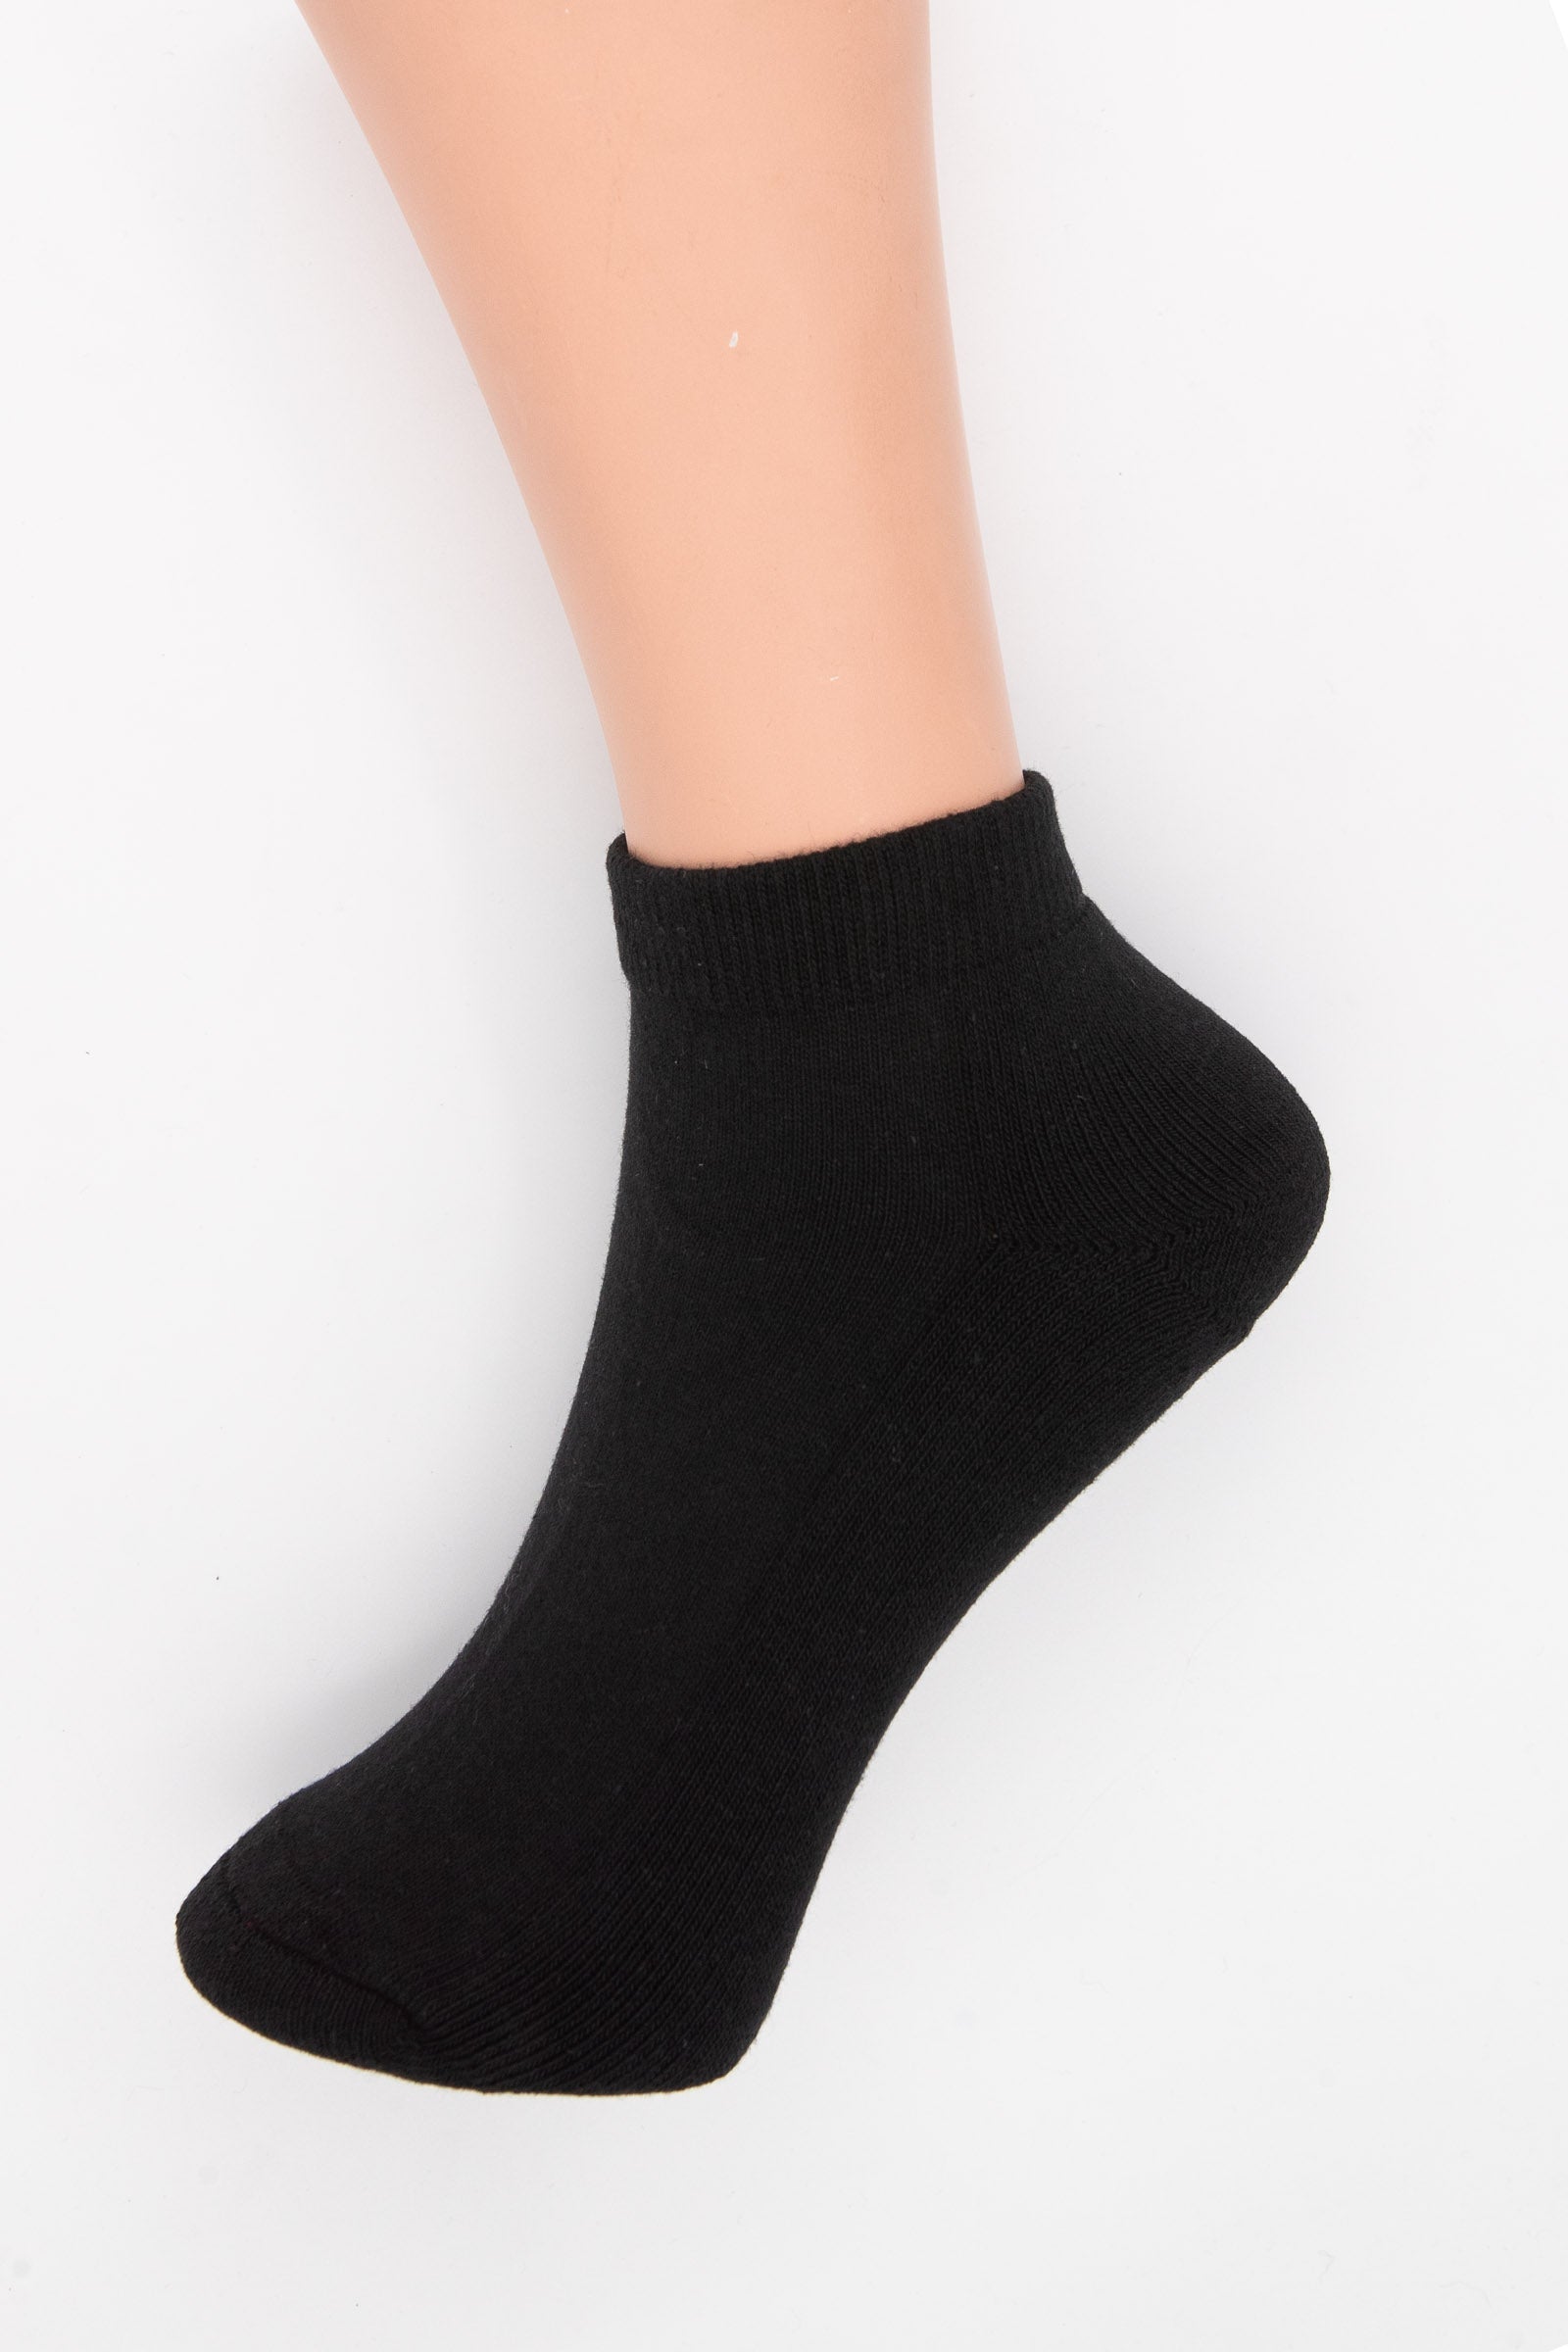 Thick Cushioned Ankle Sports Cotton Socks For Men Women 2-8 7-12 11-14 - Pantsnsox